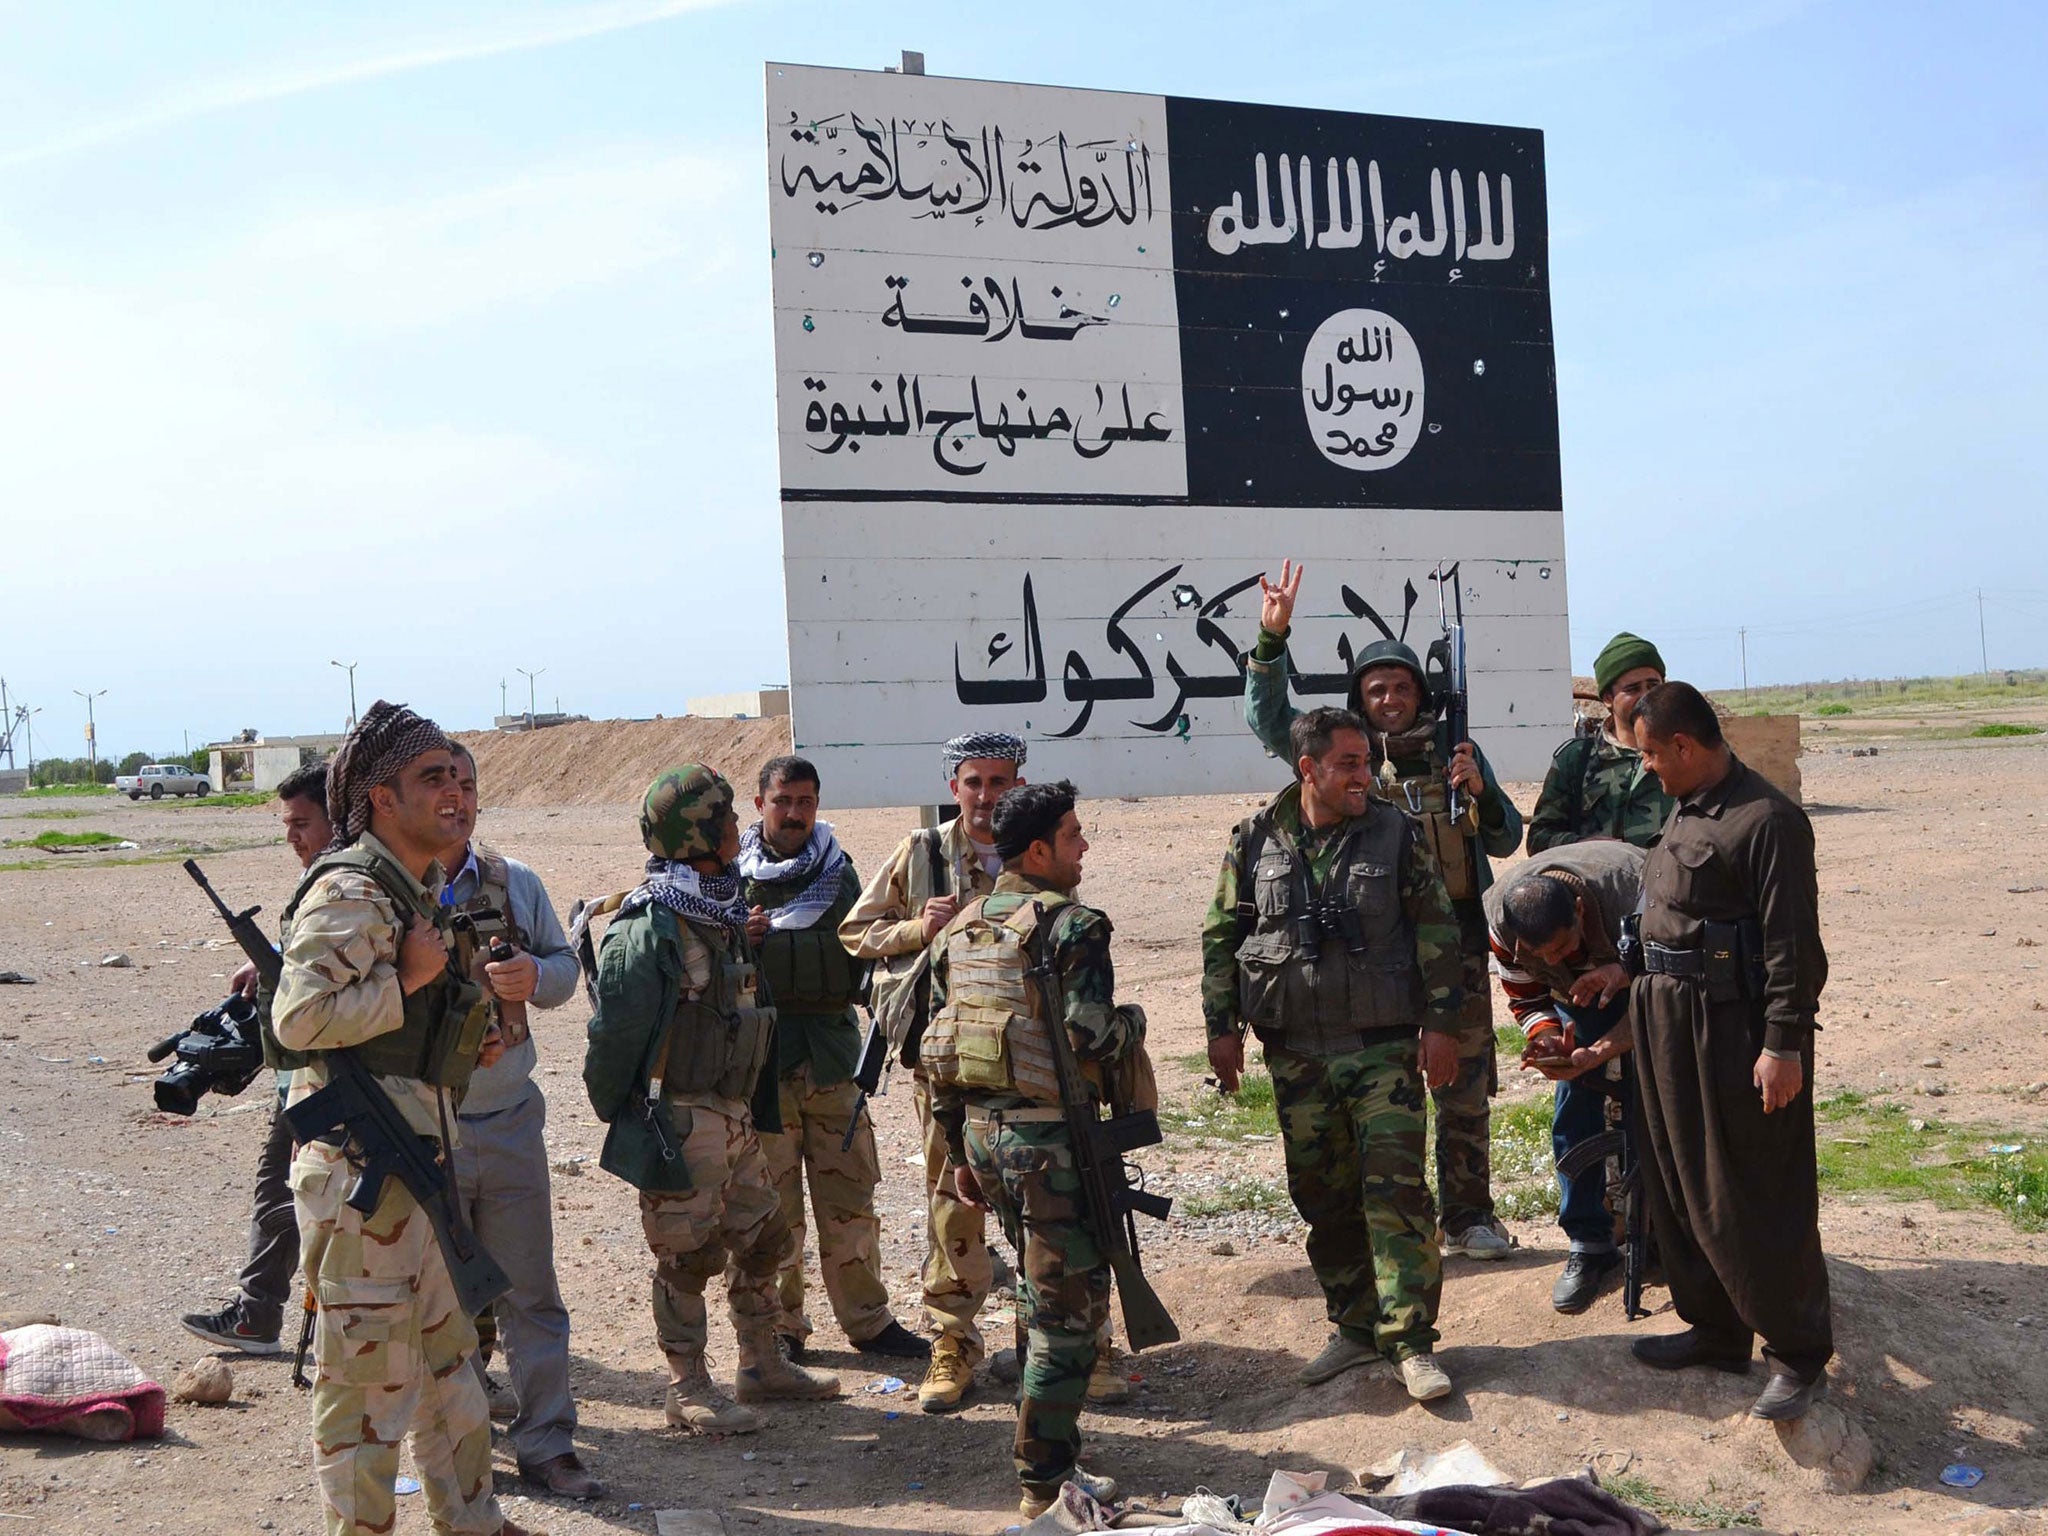 Kurdish Peshmerga fighters next to an Isis sign at the entrance to the northern Iraqi town of Hawija, south of Kirkuk, in March 2015. The battle for the town continues